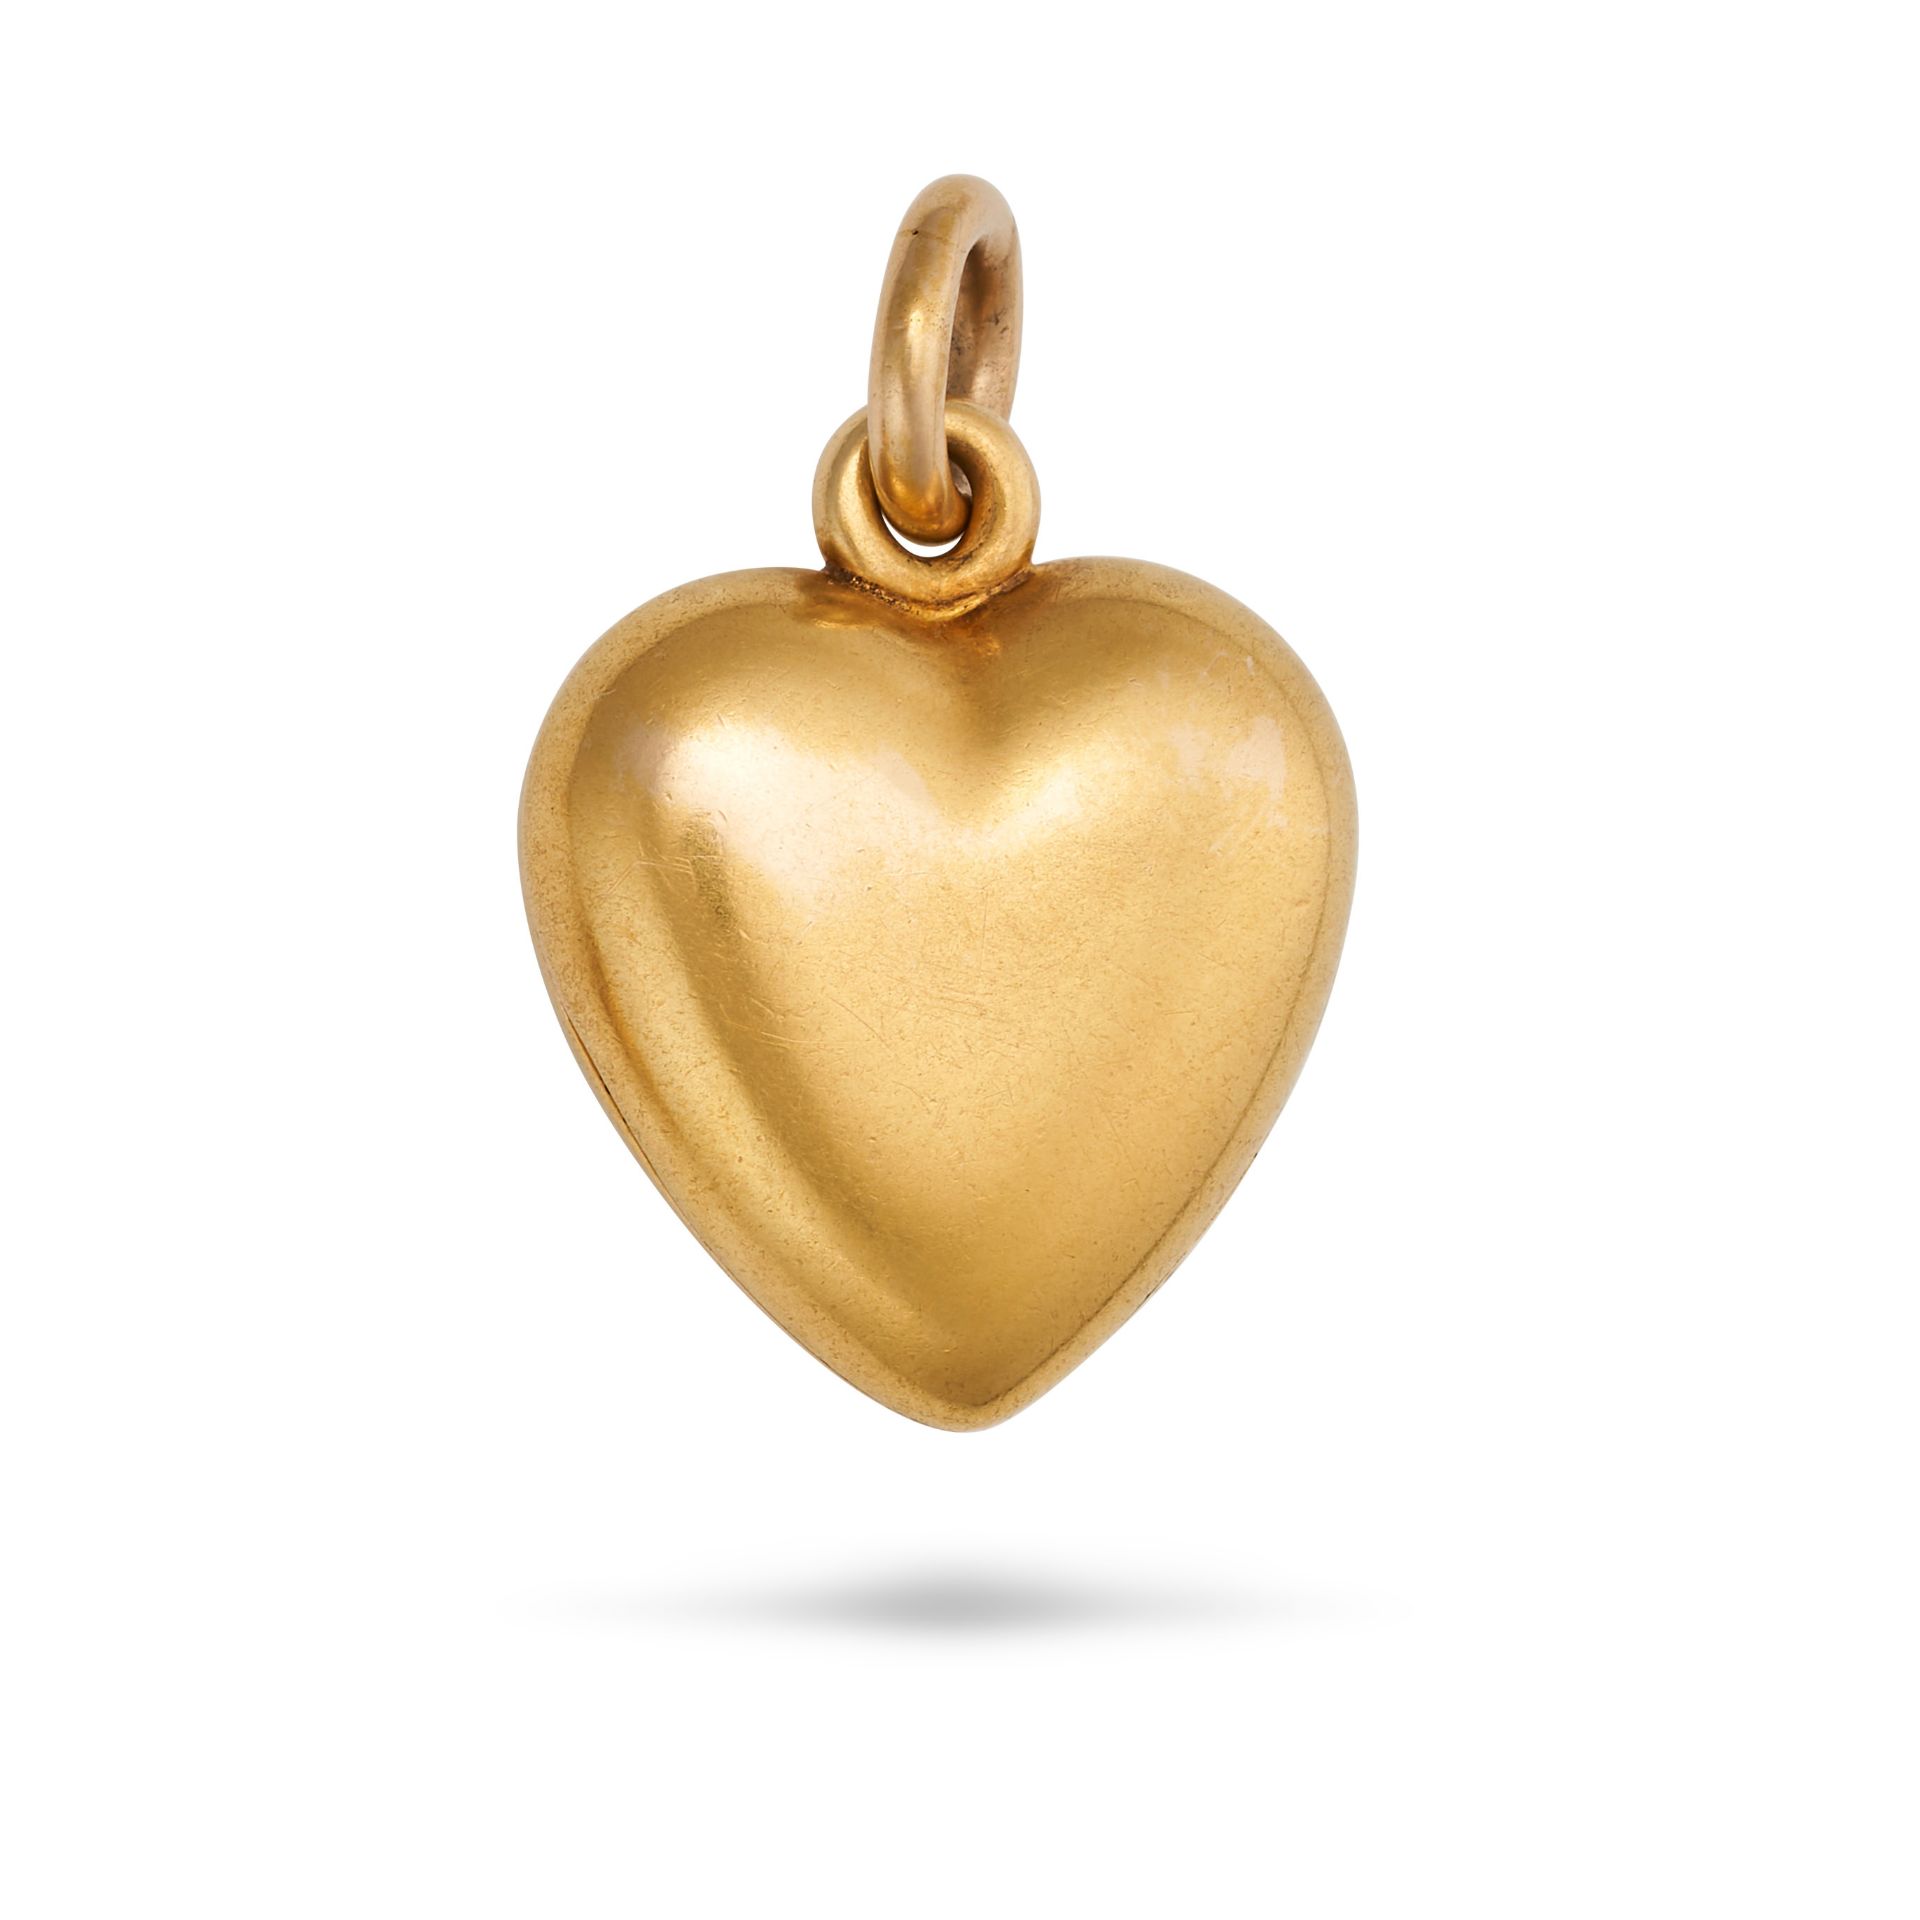 AN ANTIQUE HEART LOCKET PENDANT in yellow gold, designed as a heart, opening to reveal a locket c...